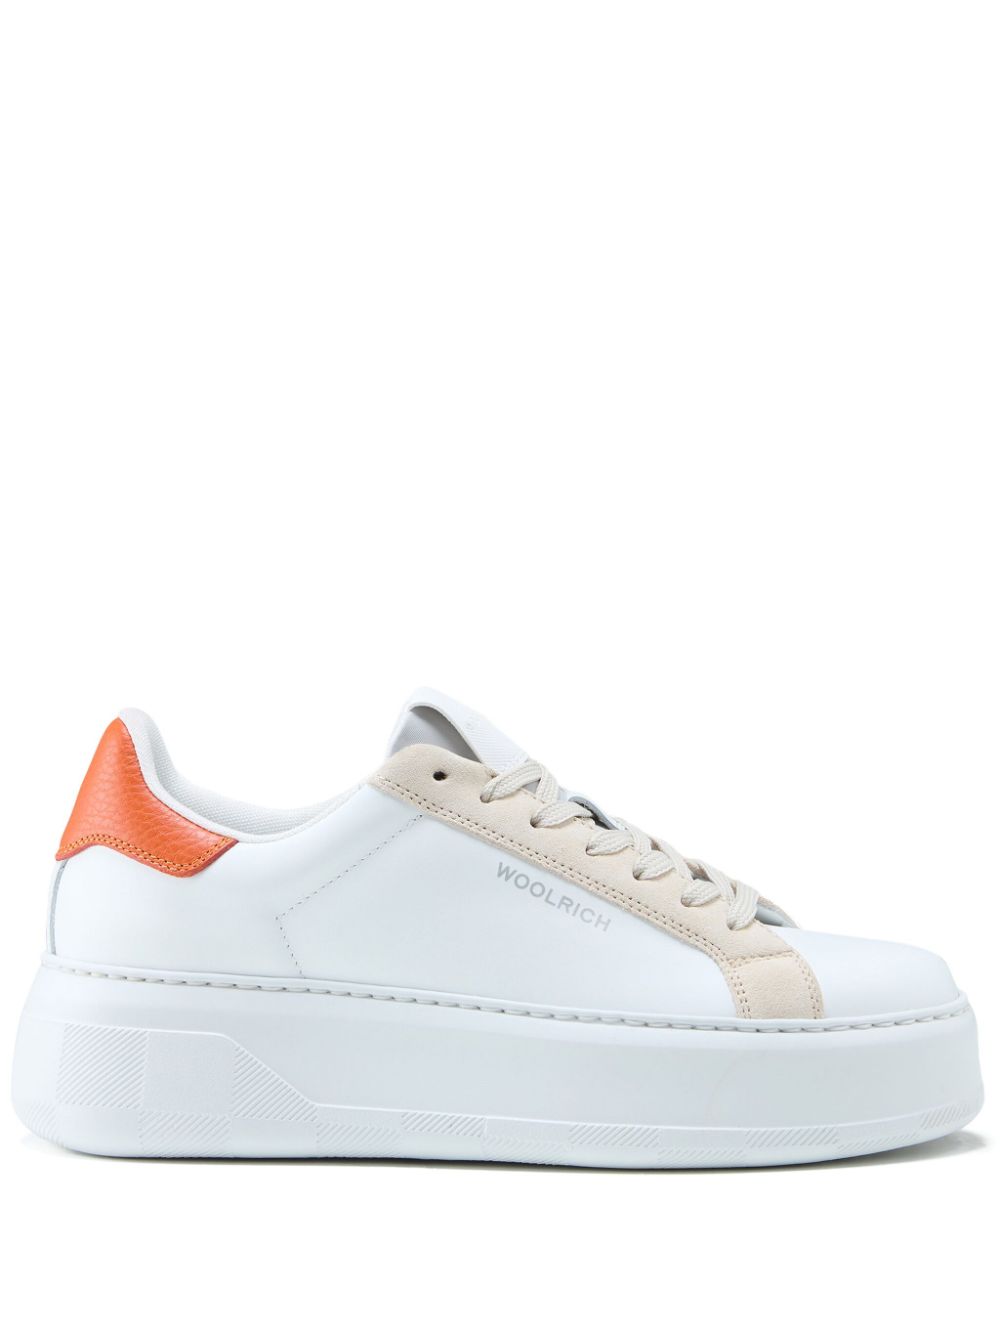 Woolrich panelled lace-up sneakers - White von Woolrich